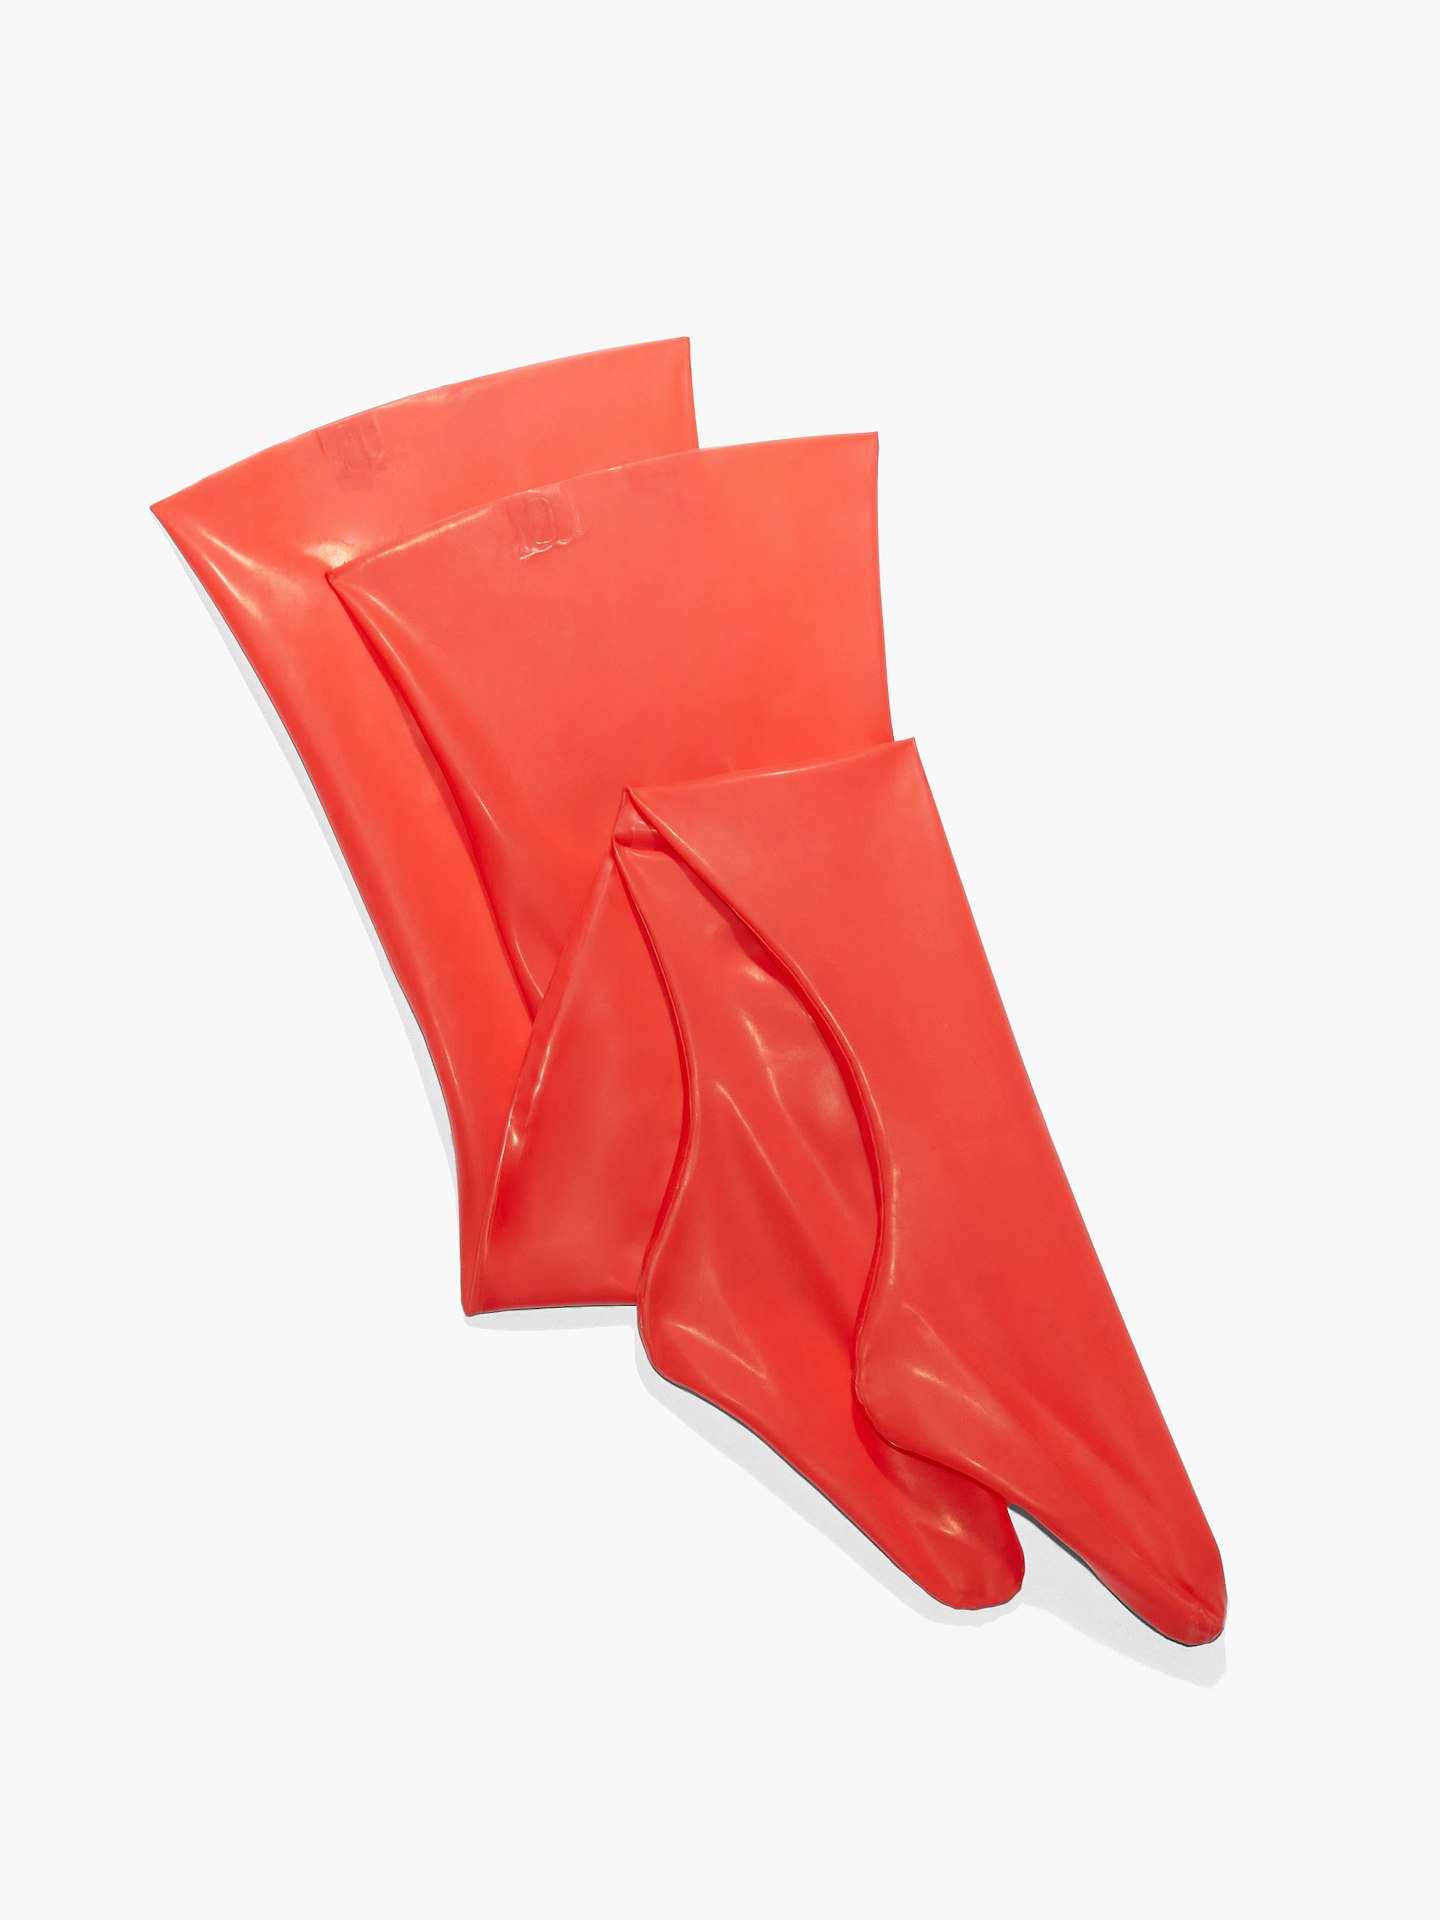 Skin Tight Stay-Up Latex Stockings, £24